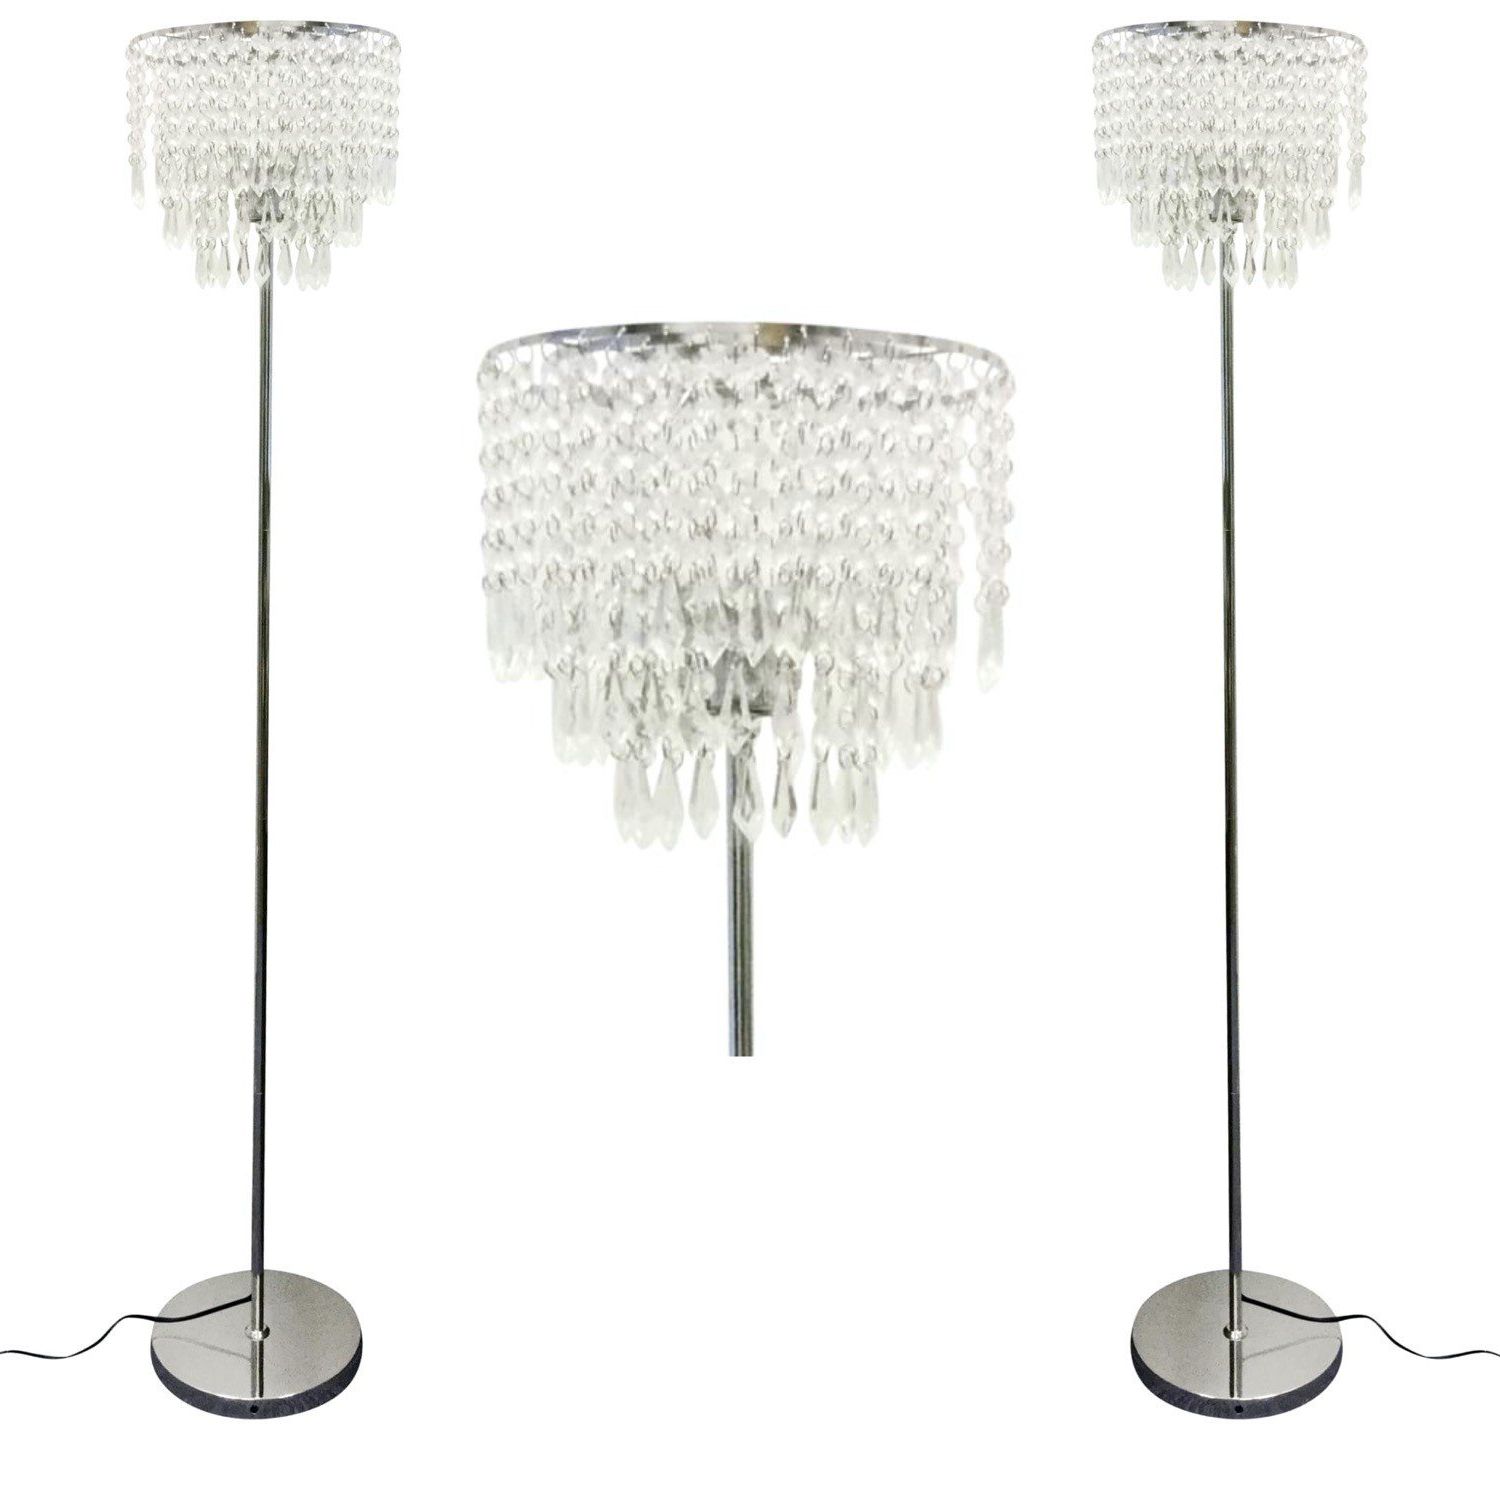 Set Of 2 Chrome And Acrylic Crystal Jewelled Floor Lamps With Chrome Crystal Tower Floor Lamps (View 13 of 20)